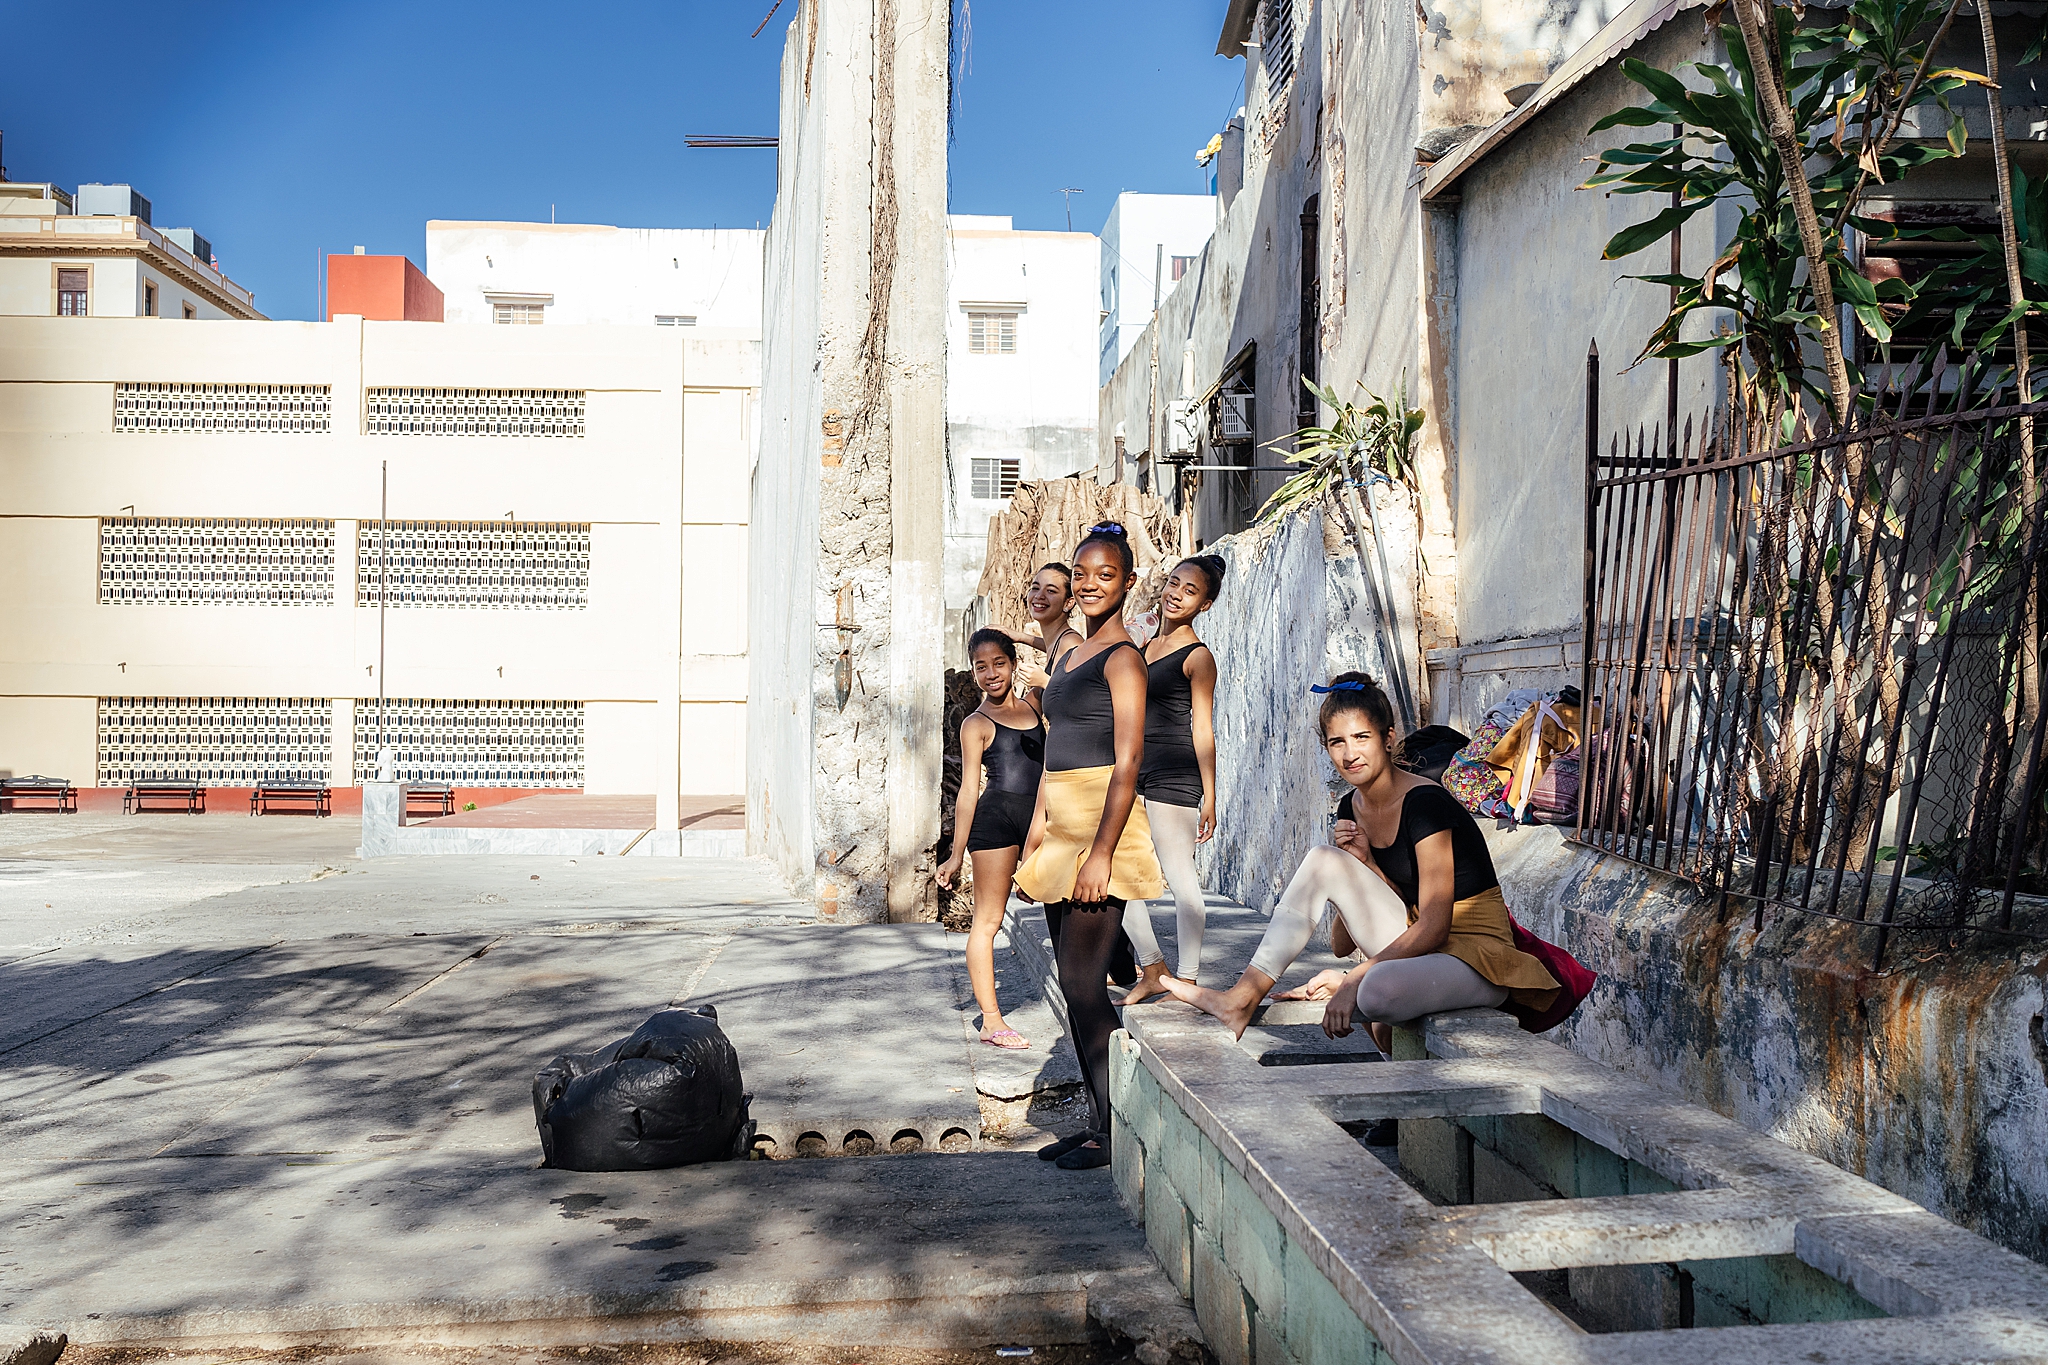  We stumbled upon these ballerinas in practicing in a concrete school yard in Vedado.  